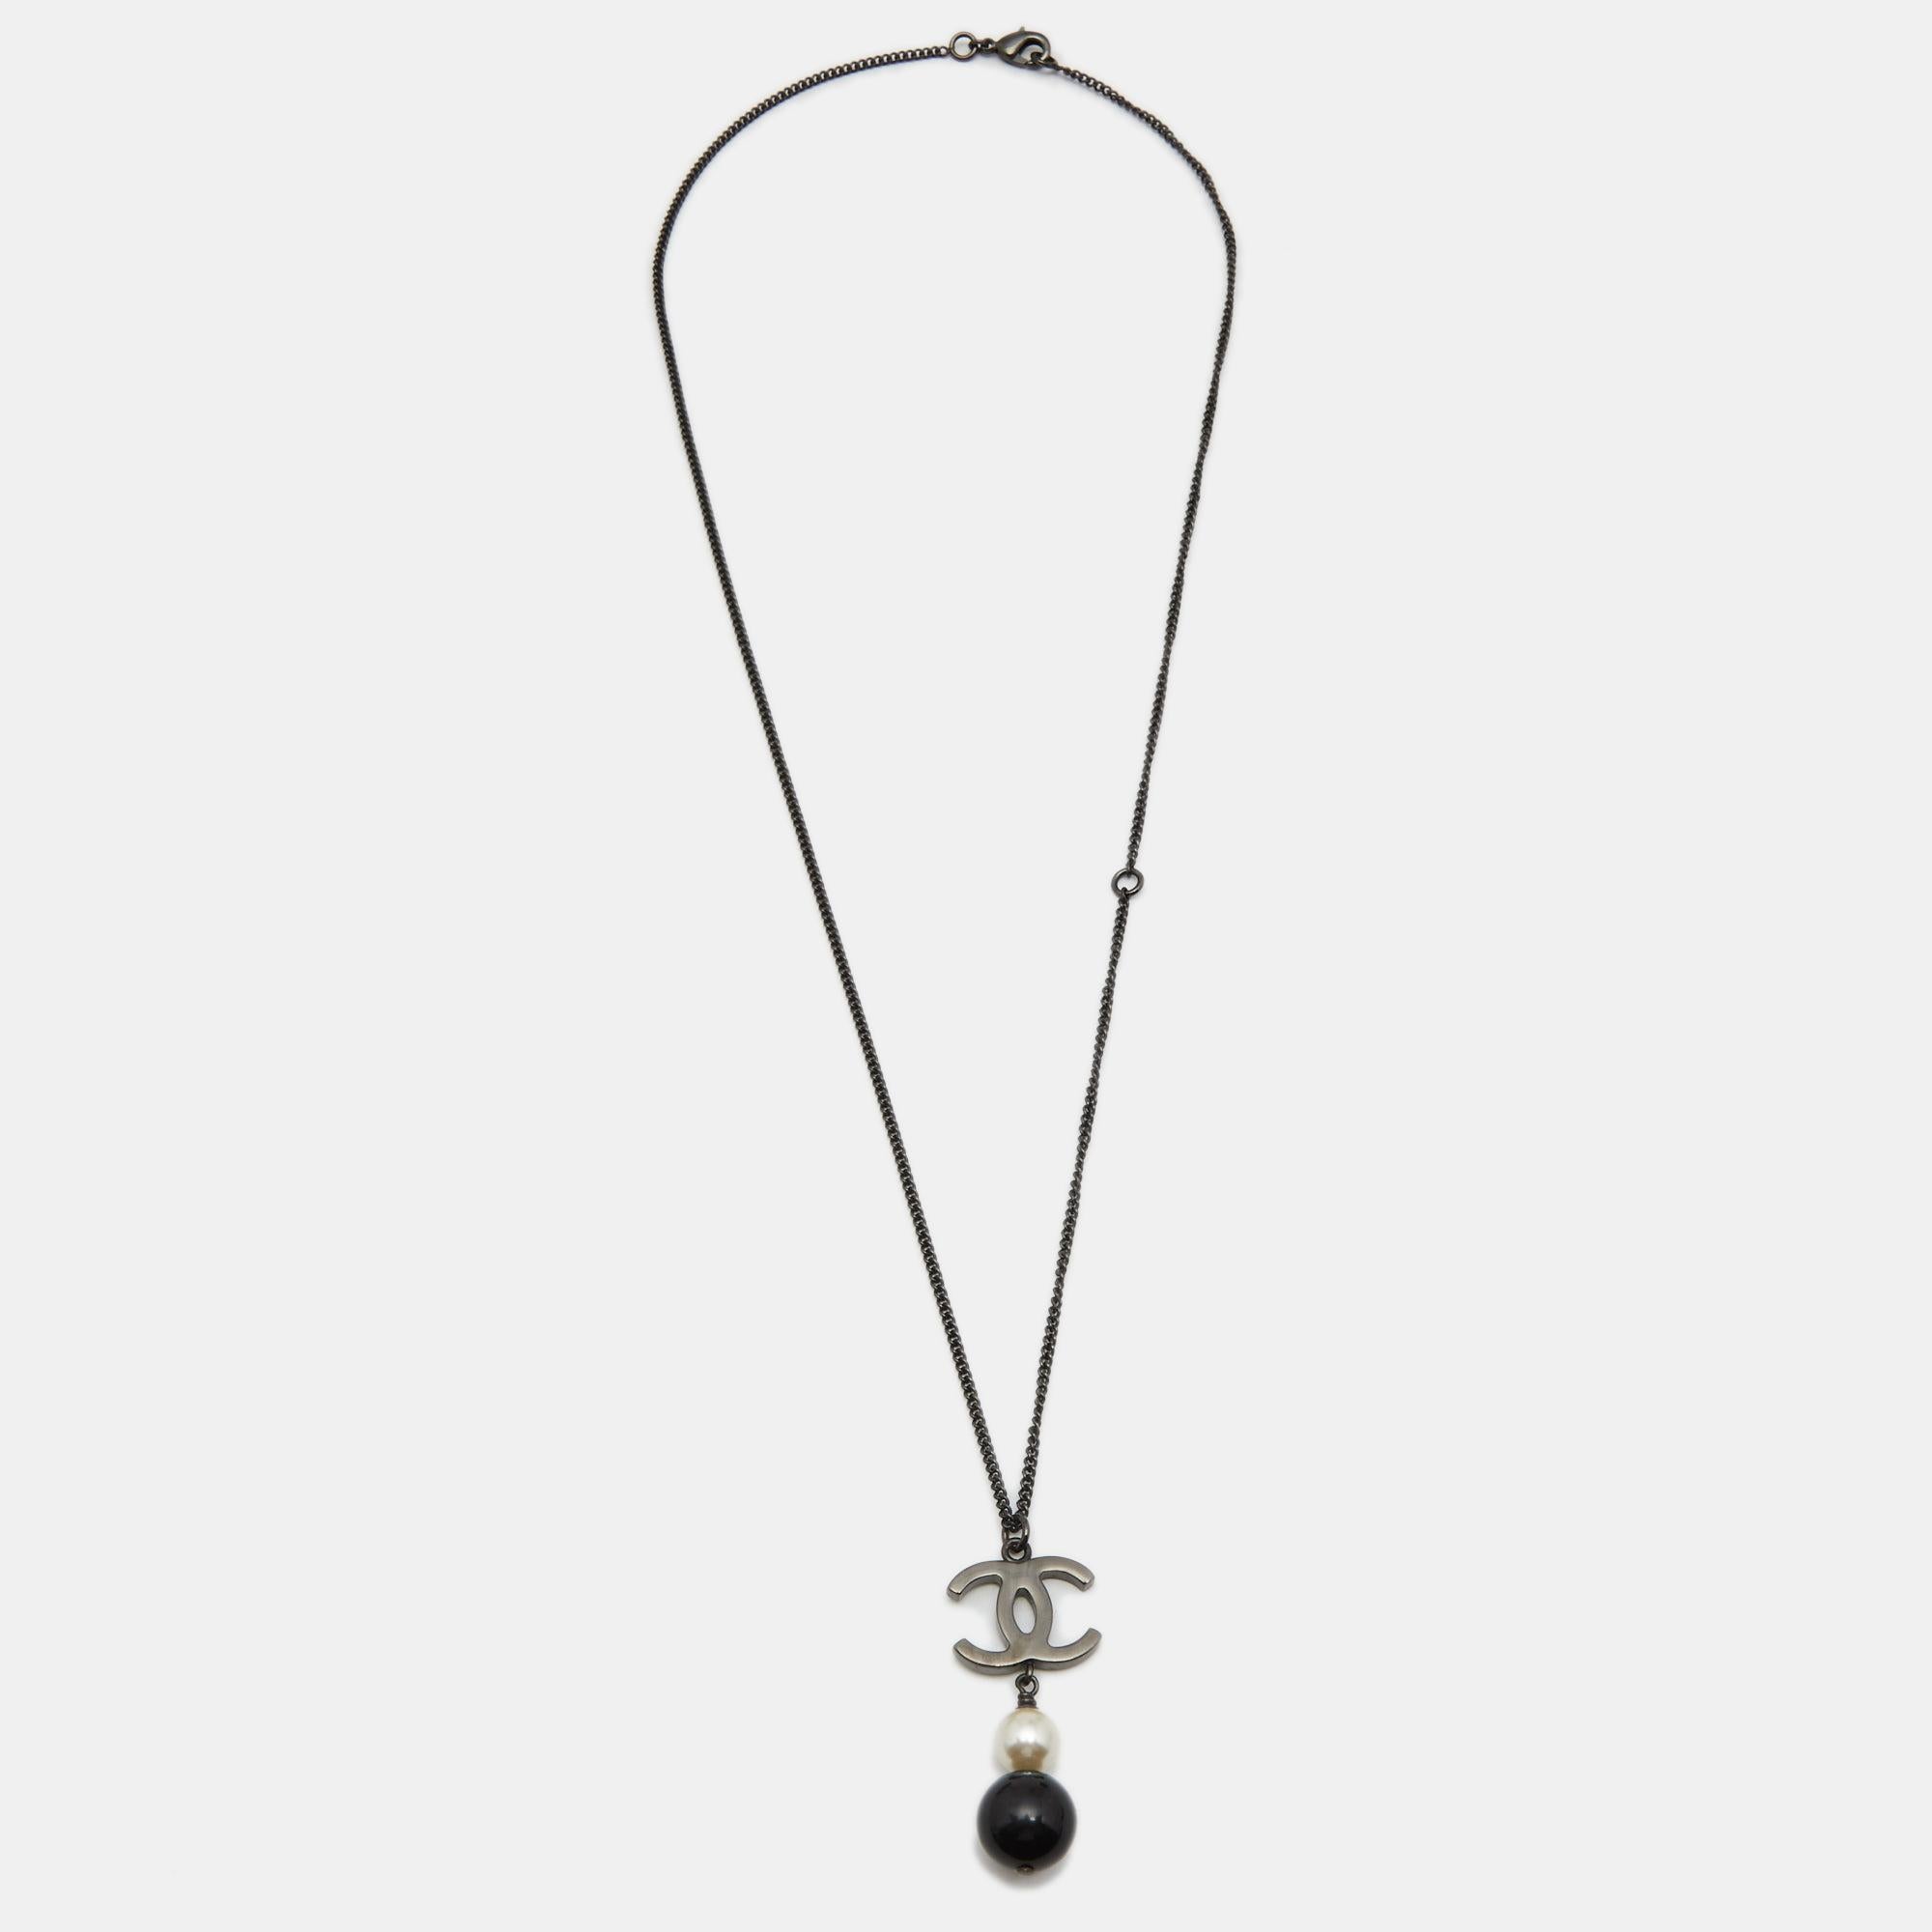 This pendant necklace from Chanel is a picture of elegance. The gunmetal-tone chain holds the CC logo charm, a faux pearl, and a bead. The chain can be secured around the neck with a lobster claw closure.

Includes: Original Box, Original Pouch
